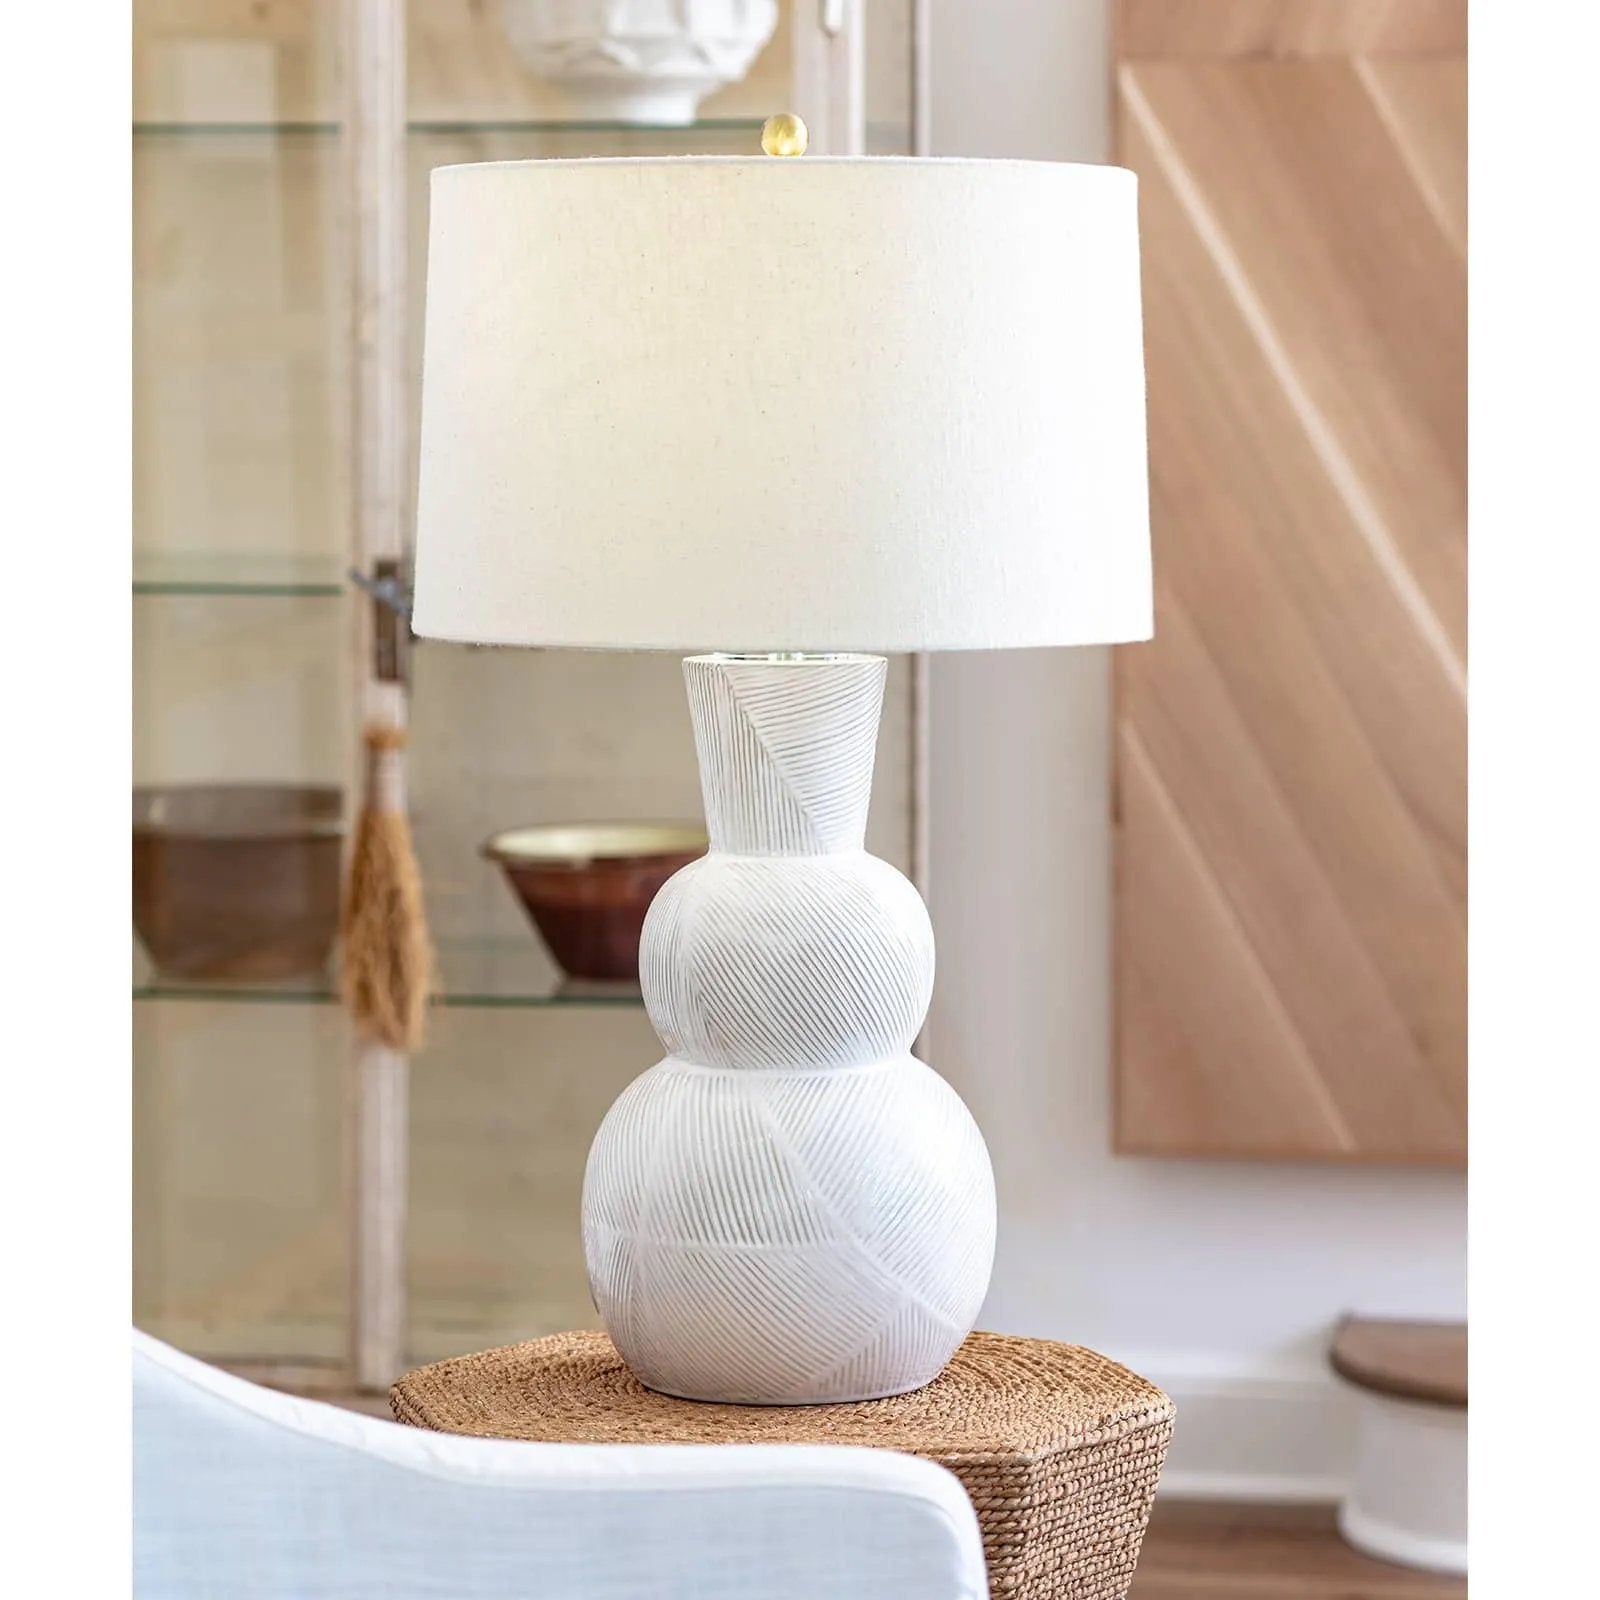 With its alluring silhouette, the Hugo ceramic table lamp brings contemporary appeal and modern contrast to interiors. Employing a specialized glazing technique, master artisans hand-shape earthenware to produce a luxurious finish for subtle highs and lows that shift with the light source above. Amethyst Home provides interior design, new home construction design consulting, vintage area rugs, and lighting in the Laguna Beach metro area.